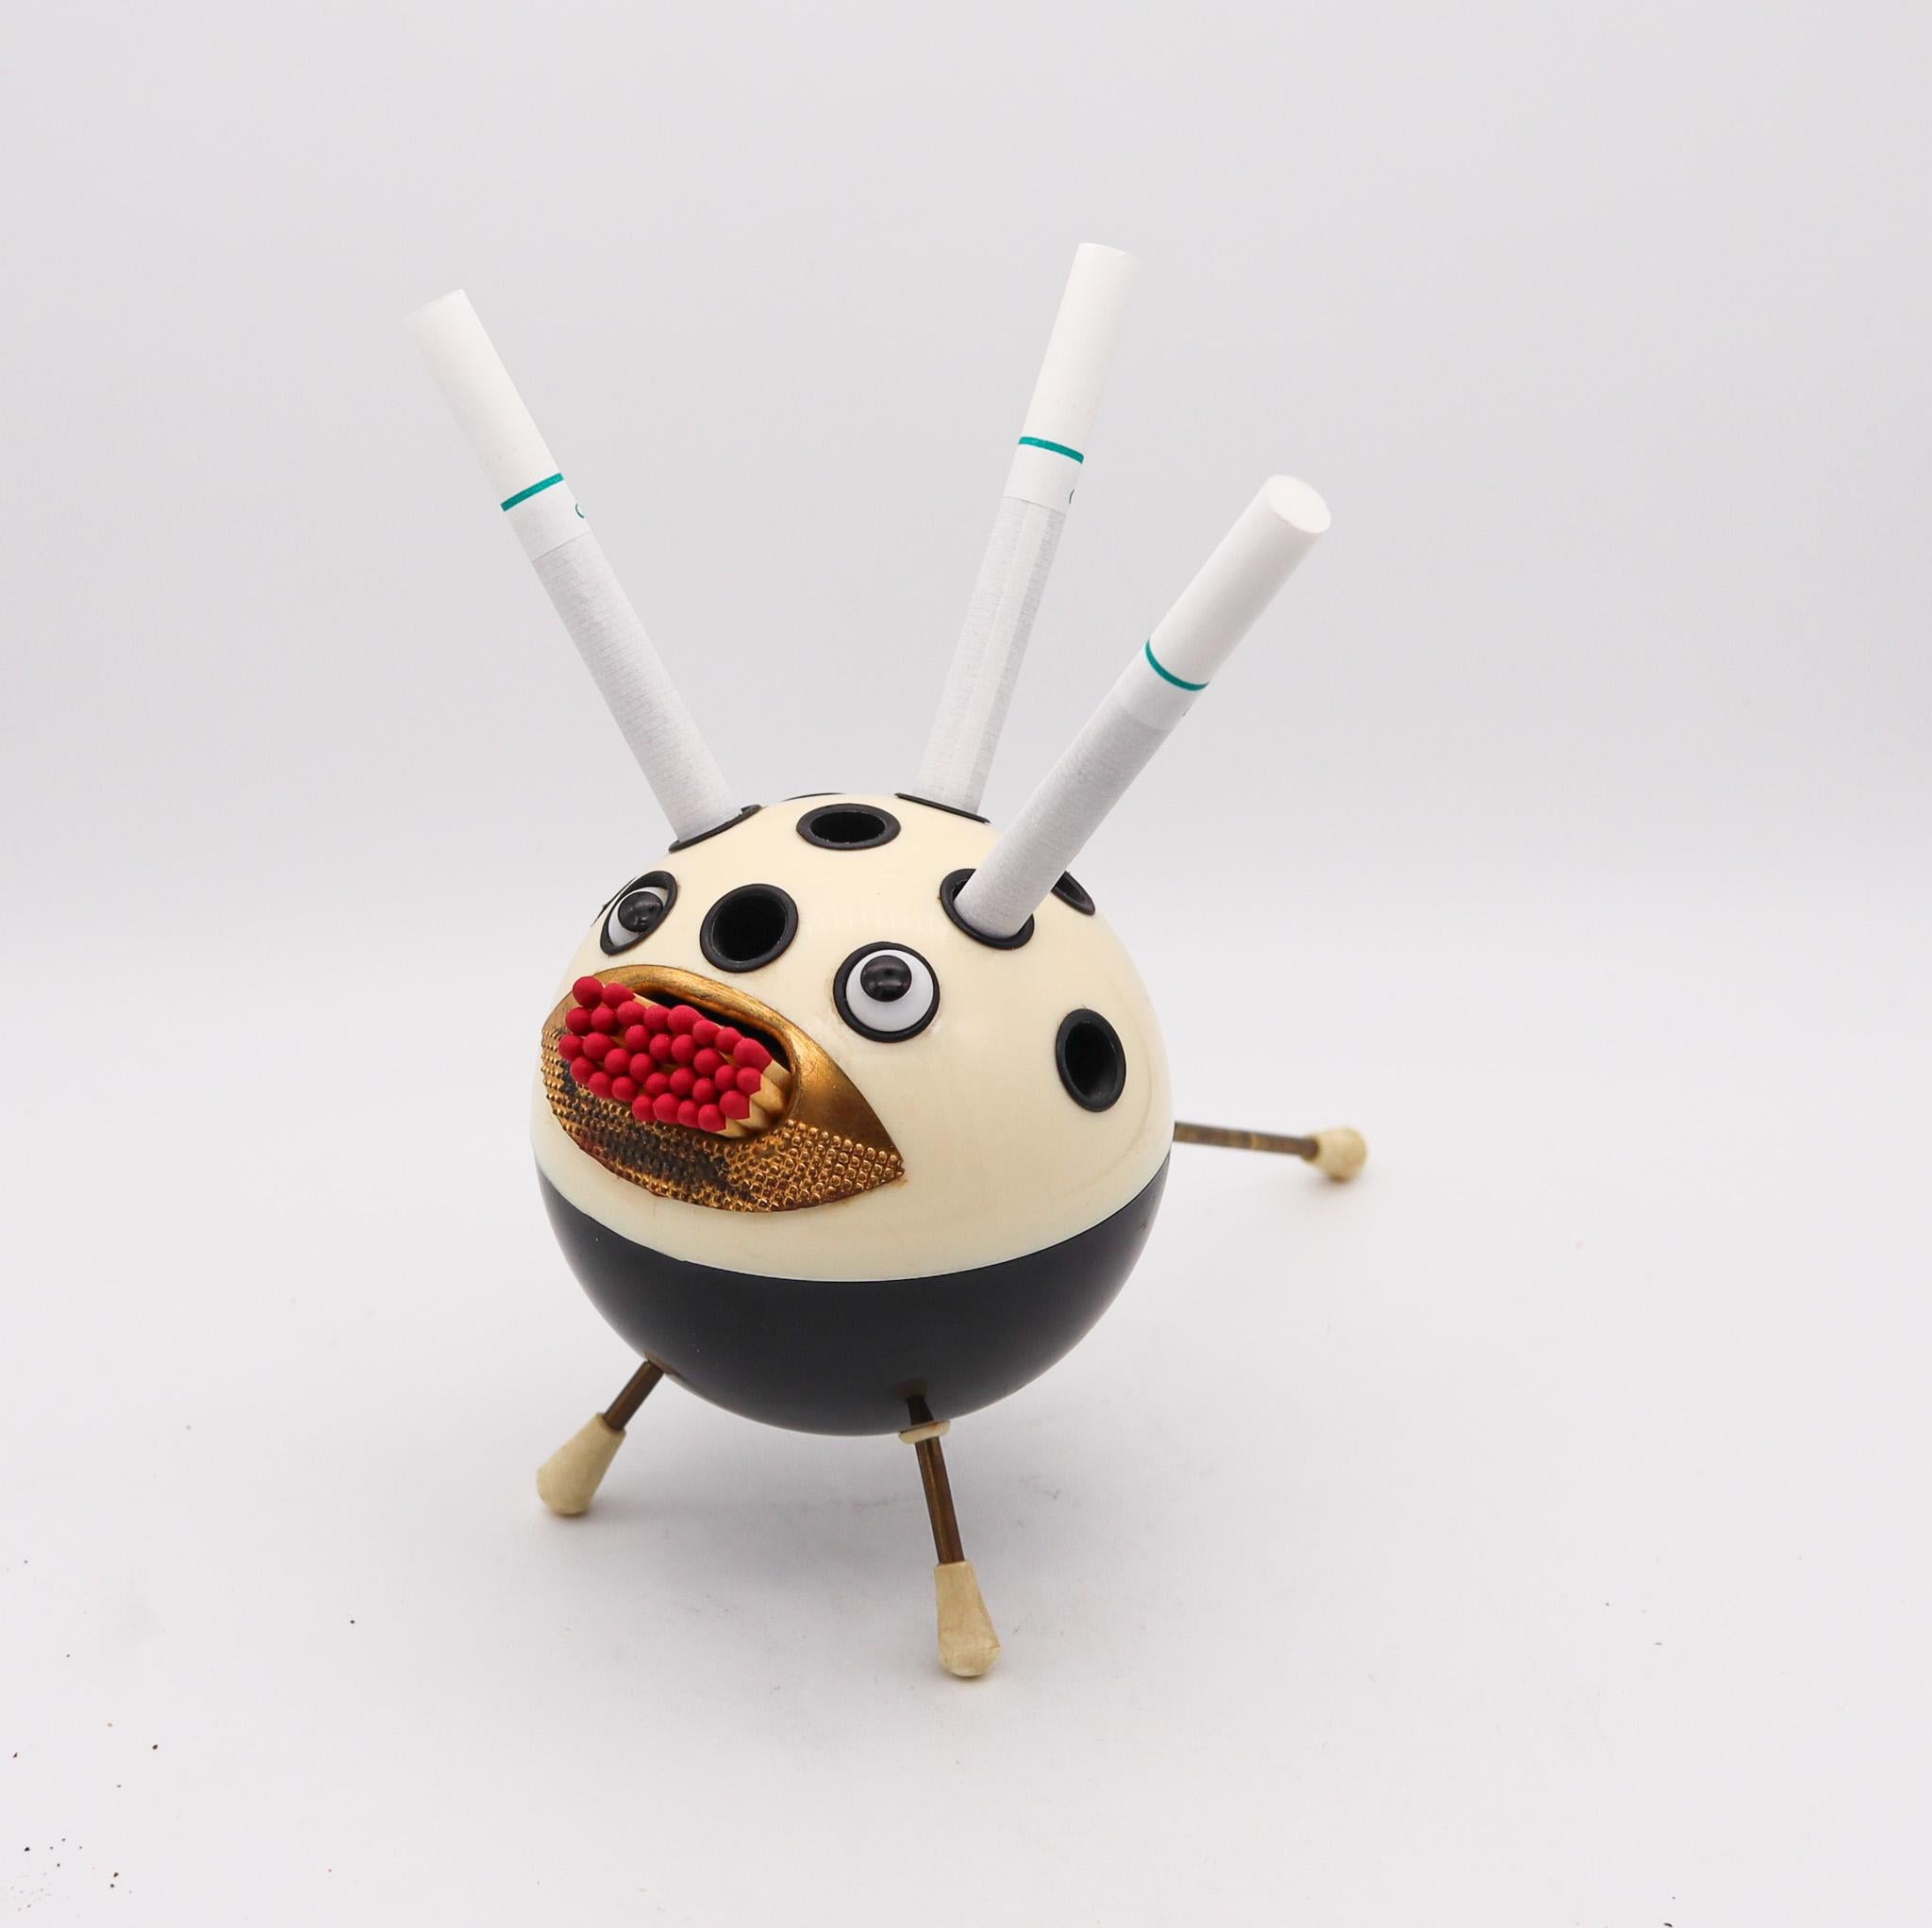 Sputnik space era cigarette holder.

Extremely funny and very hilarious piece, created during the space era back in the 1950s. Crafted in the shape of a Sputnik in black and cream plastics with three steel legs. The so called globe fish have ten